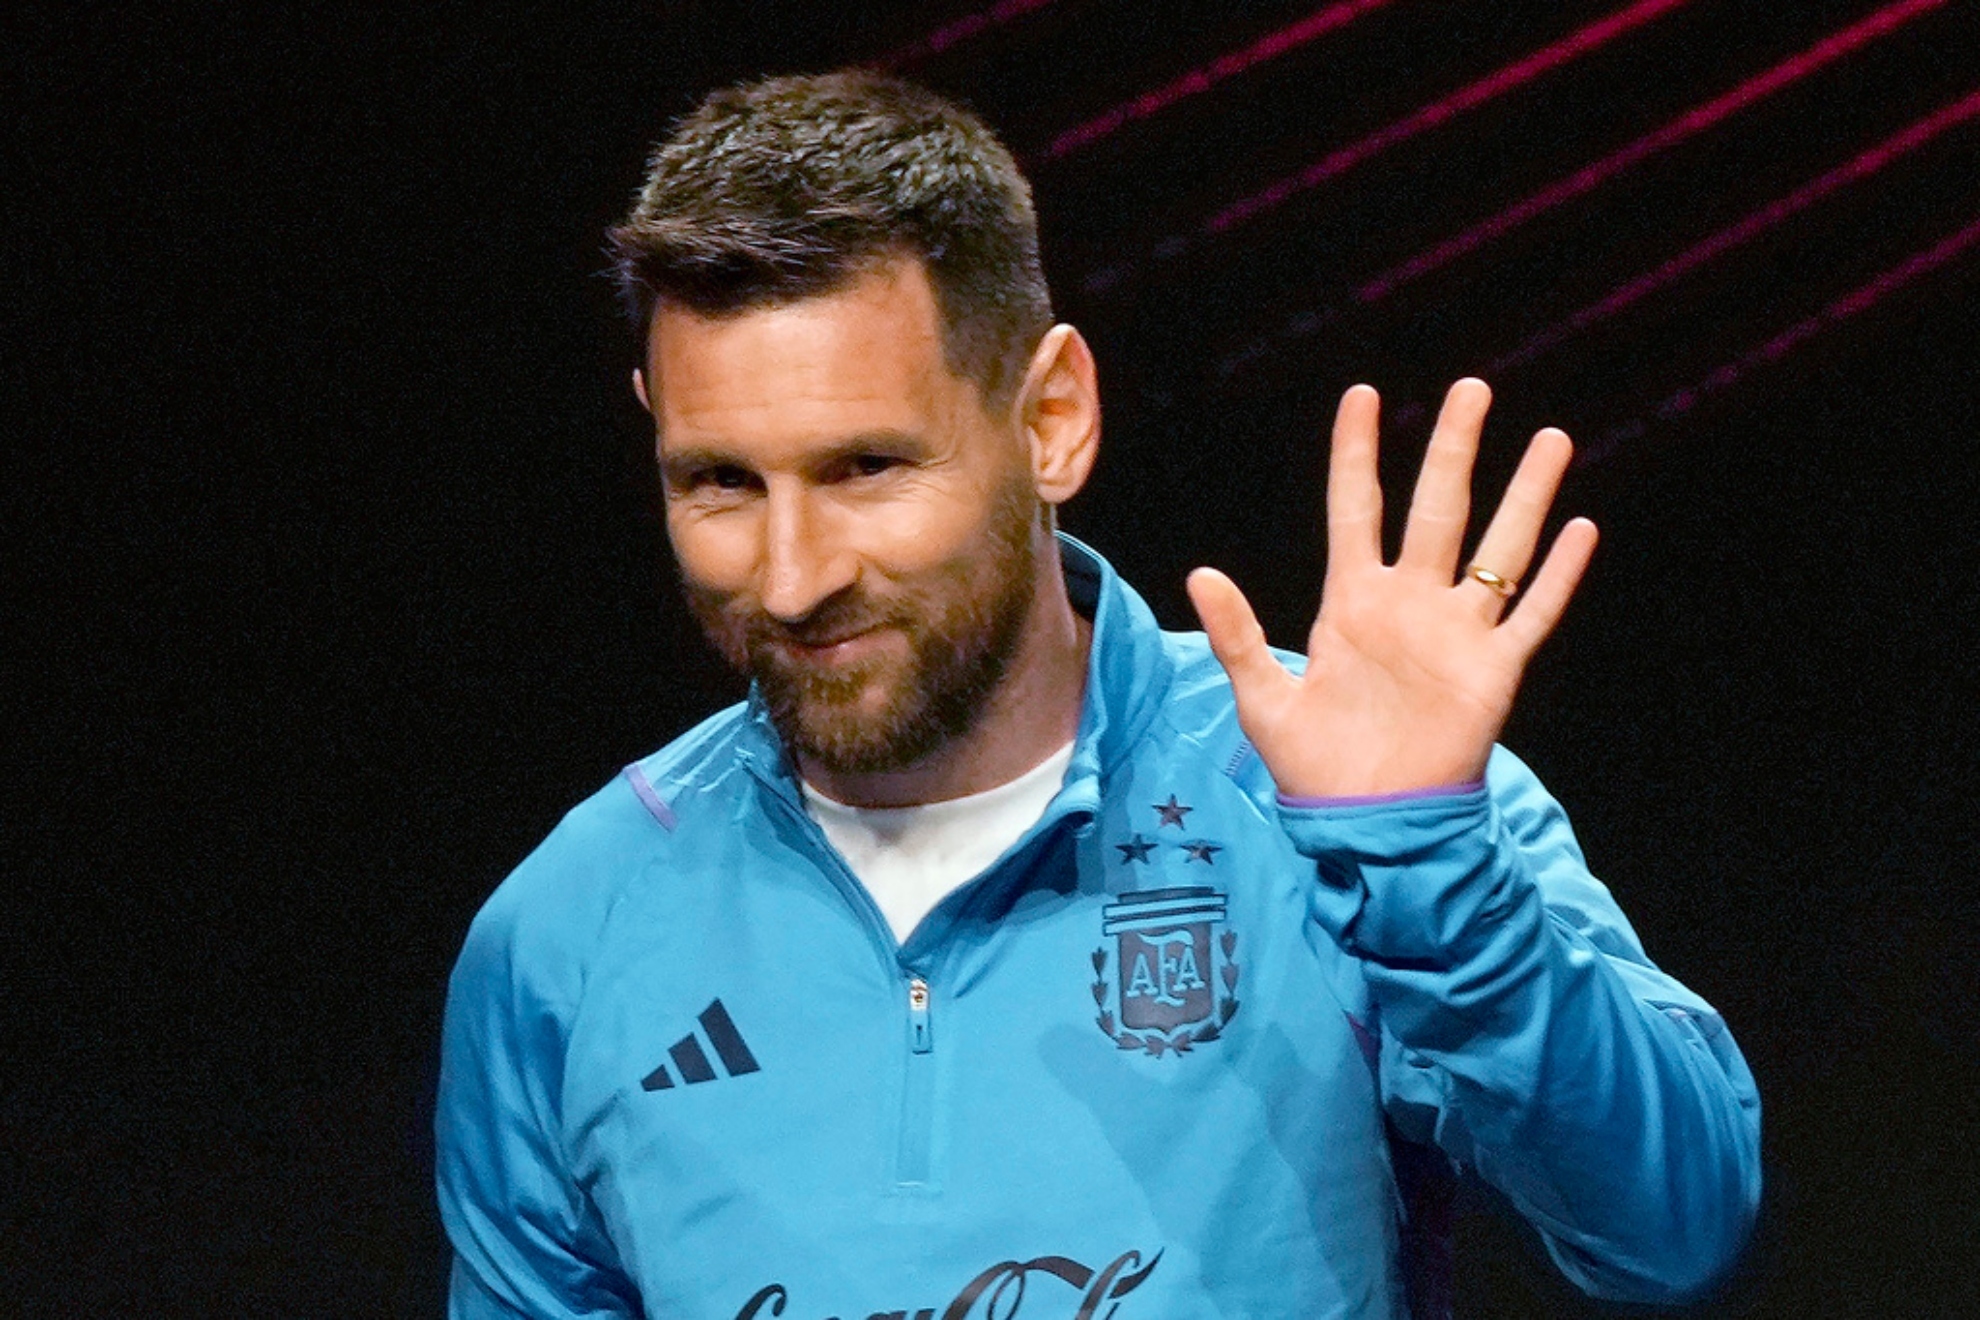 Messi's fairy tale begins by breaking an MLS record in just 4 games